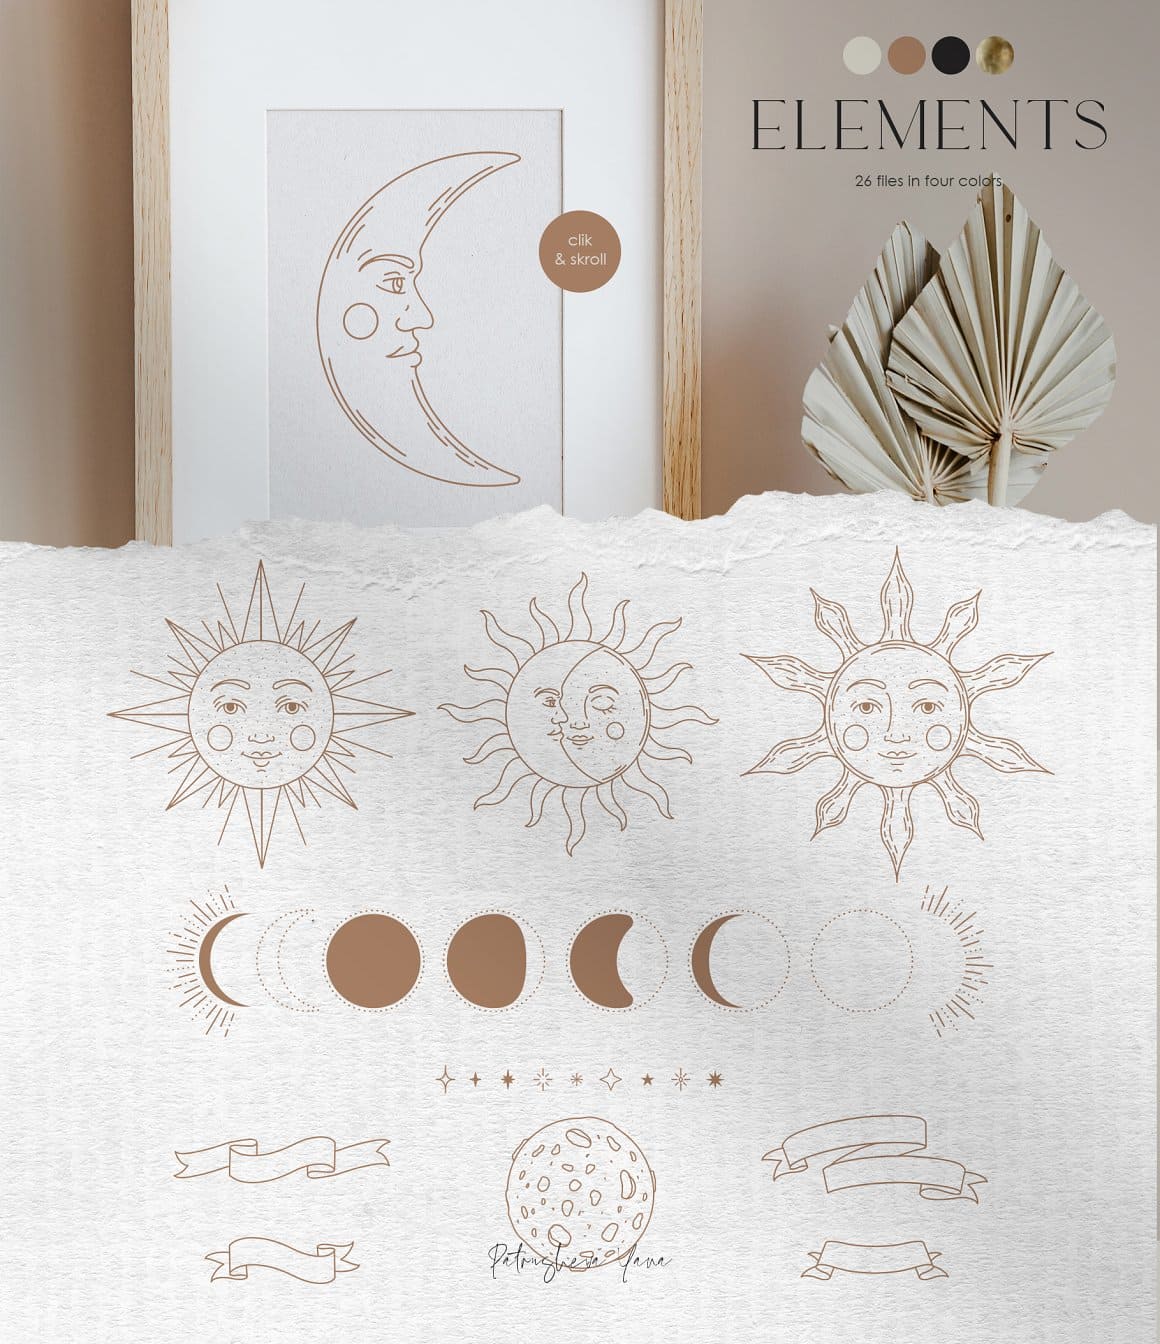 Zodiac Elements 26 files in four colors, phases of the solar eclipse.